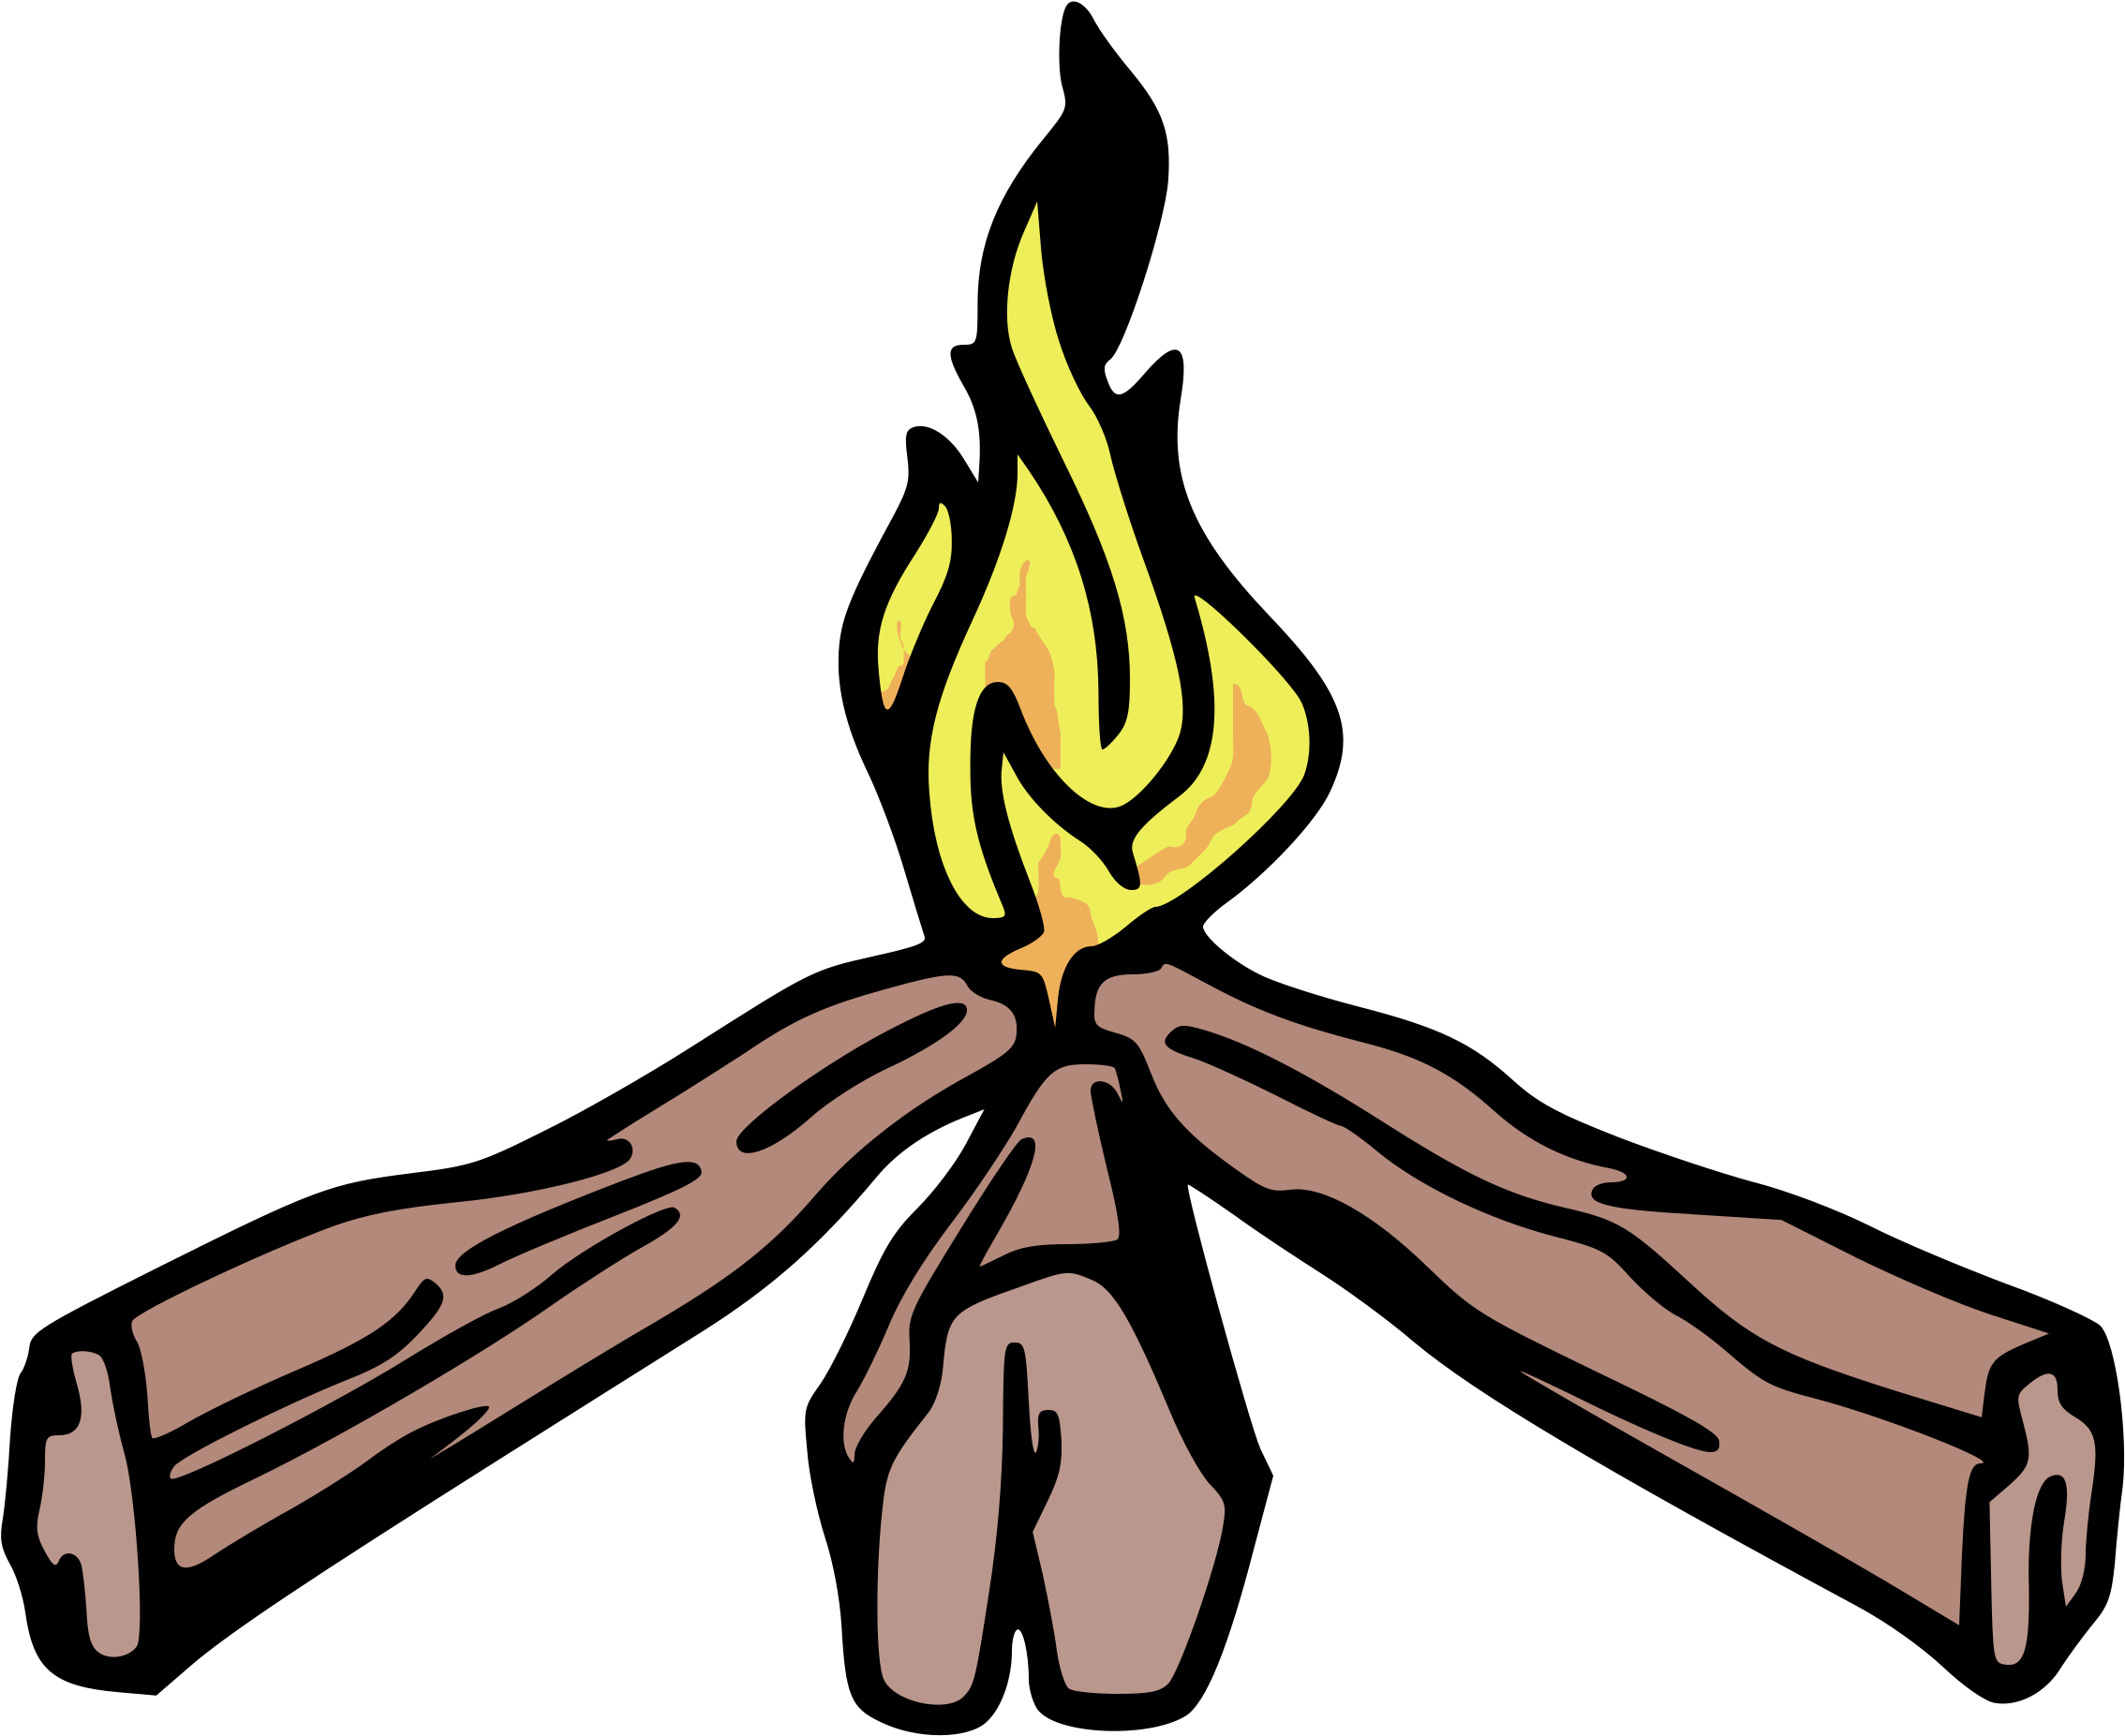 A Drawing Of Hands Holding A Fire